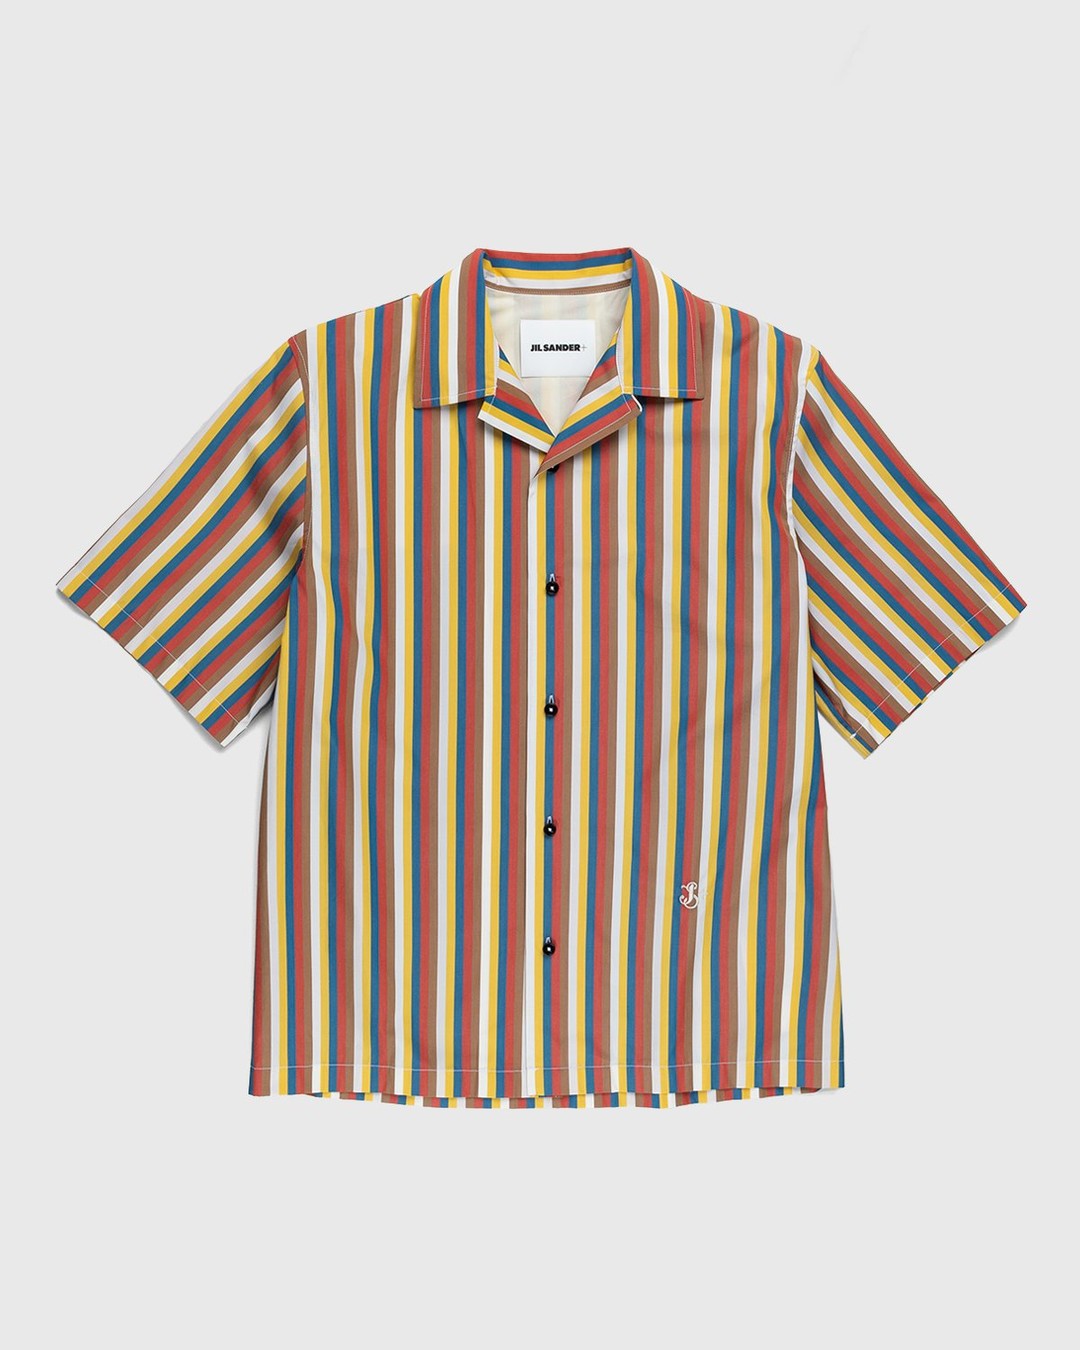 Jil Sander – Striped Vacation Shirt Red/White - Shirts - Red - Image 1